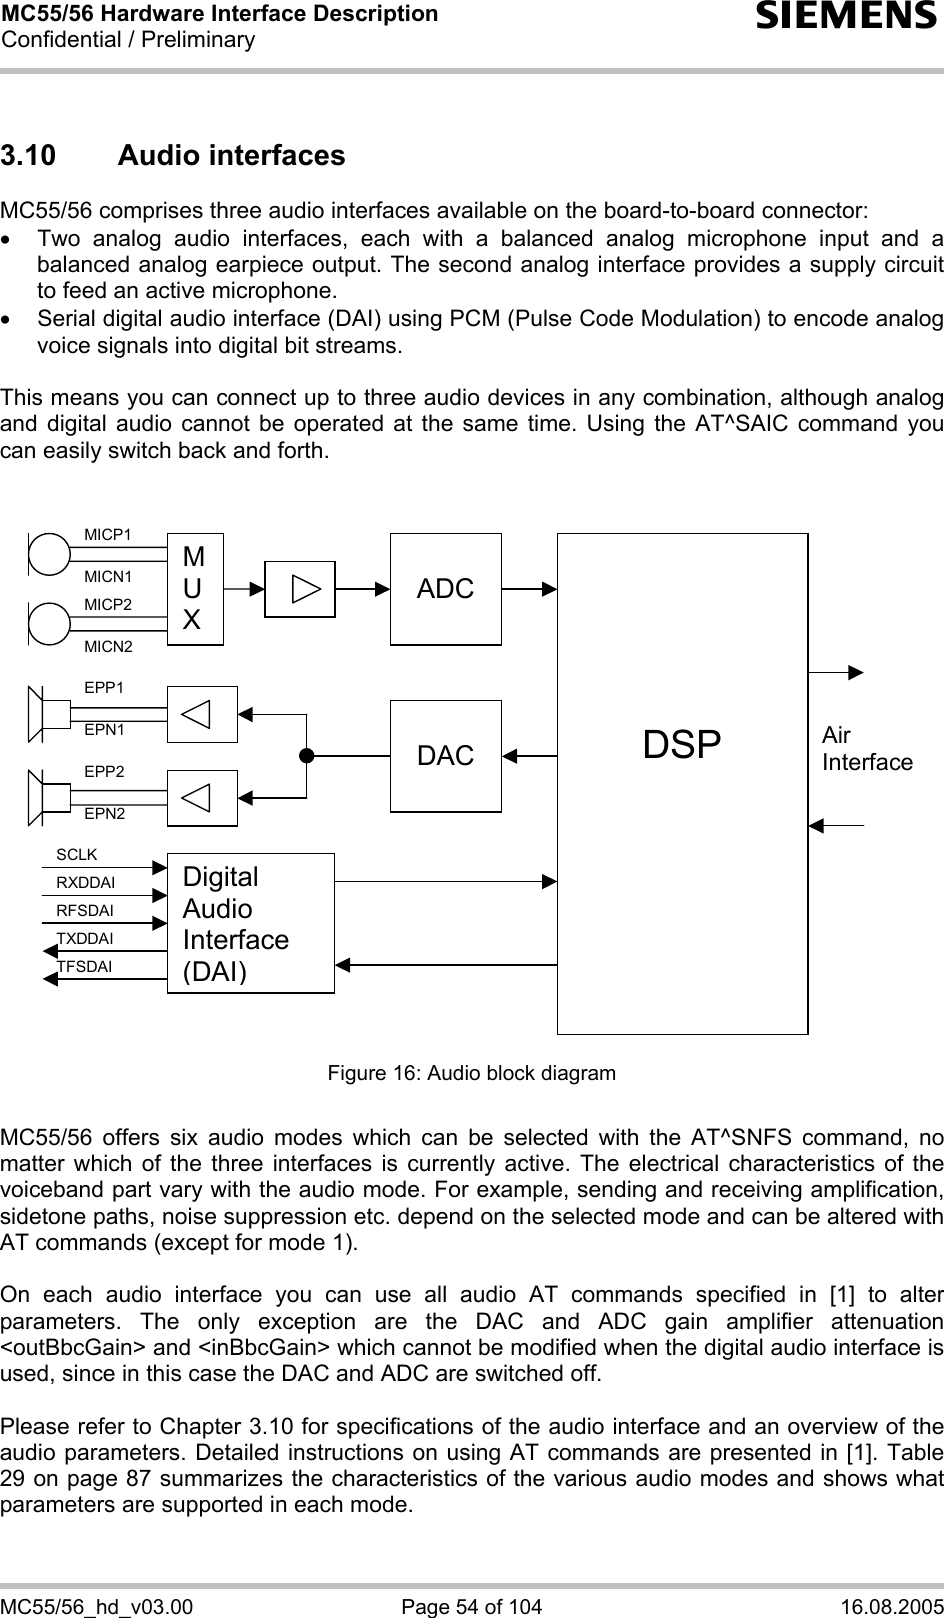 MC55/56 Hardware Interface Description Confidential / Preliminary s MC55/56_hd_v03.00  Page 54 of 104  16.08.2005 3.10 Audio interfaces MC55/56 comprises three audio interfaces available on the board-to-board connector:  •  Two analog audio interfaces, each with a balanced analog microphone input and a balanced analog earpiece output. The second analog interface provides a supply circuit to feed an active microphone. •  Serial digital audio interface (DAI) using PCM (Pulse Code Modulation) to encode analog voice signals into digital bit streams.  This means you can connect up to three audio devices in any combination, although analog and digital audio cannot be operated at the same time. Using the AT^SAIC command you can easily switch back and forth.    M U X  ADC    DSP  DAC Air InterfaceDigital Audio Interface (DAI) MICP1 MICN1 MICP2 MICN2 EPP1 EPN1 EPP2 EPN2 SCLK RXDDAI TFSDAI RFSDAI TXDDAI  Figure 16: Audio block diagram  MC55/56 offers six audio modes which can be selected with the AT^SNFS command, no matter which of the three interfaces is currently active. The electrical characteristics of the voiceband part vary with the audio mode. For example, sending and receiving amplification, sidetone paths, noise suppression etc. depend on the selected mode and can be altered with AT commands (except for mode 1).  On each audio interface you can use all audio AT commands specified in [1] to alter parameters. The only exception are the DAC and ADC gain amplifier attenuation &lt;outBbcGain&gt; and &lt;inBbcGain&gt; which cannot be modified when the digital audio interface is used, since in this case the DAC and ADC are switched off.  Please refer to Chapter 3.10 for specifications of the audio interface and an overview of the audio parameters. Detailed instructions on using AT commands are presented in [1]. Table 29 on page 87 summarizes the characteristics of the various audio modes and shows what parameters are supported in each mode. 